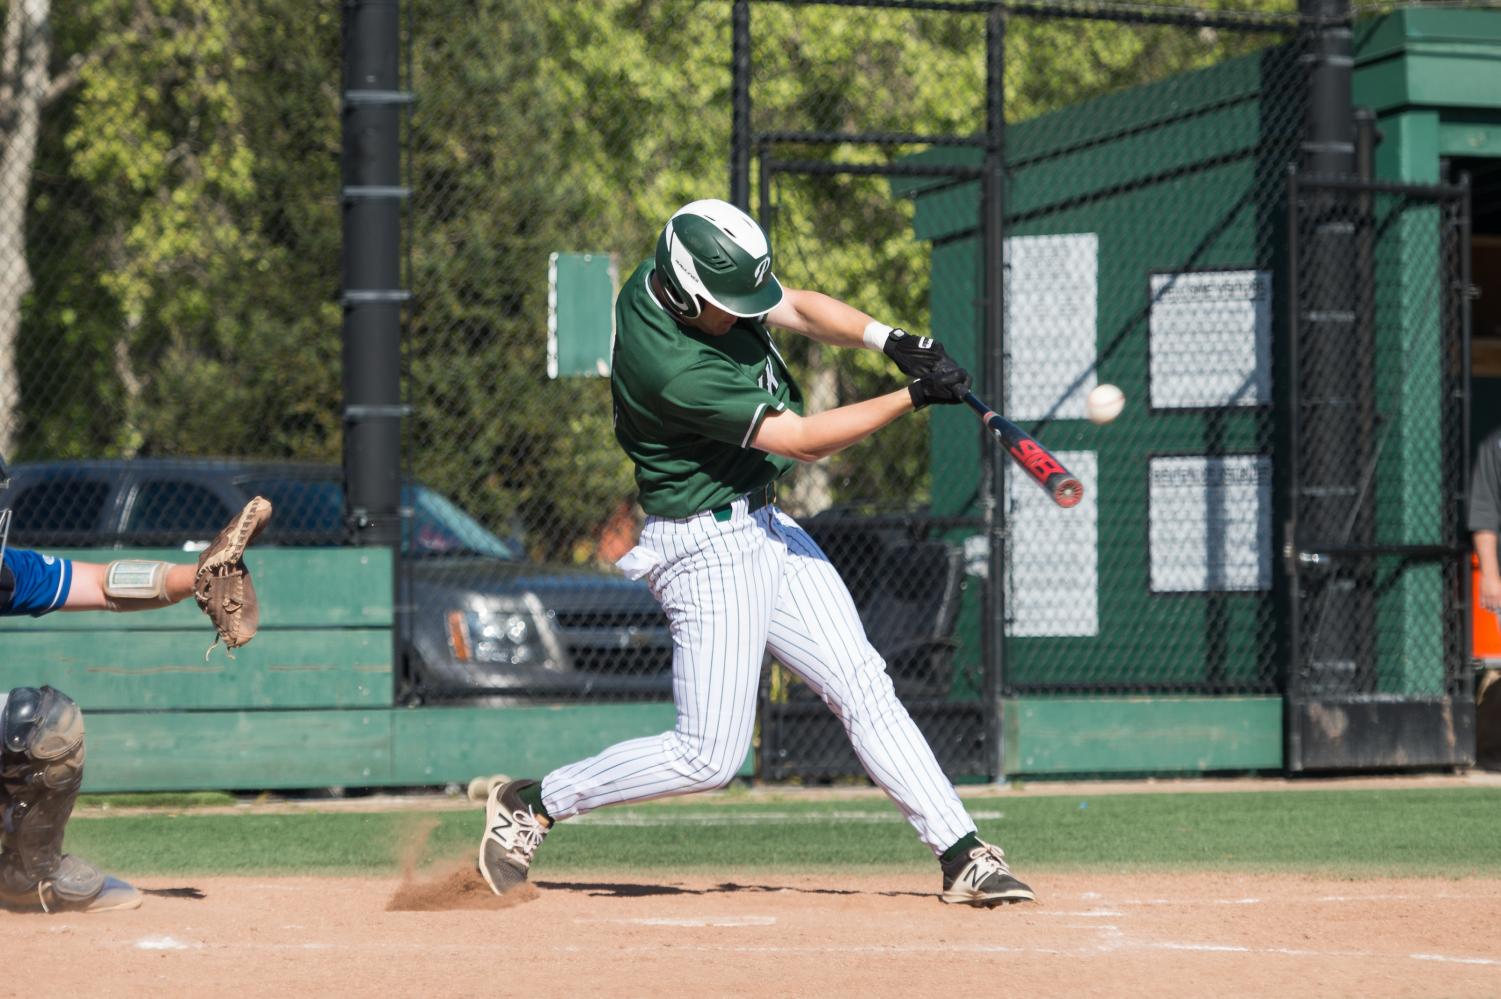 Paly+scores+17+unanswered+runs+in+demolition+of+Milpitas